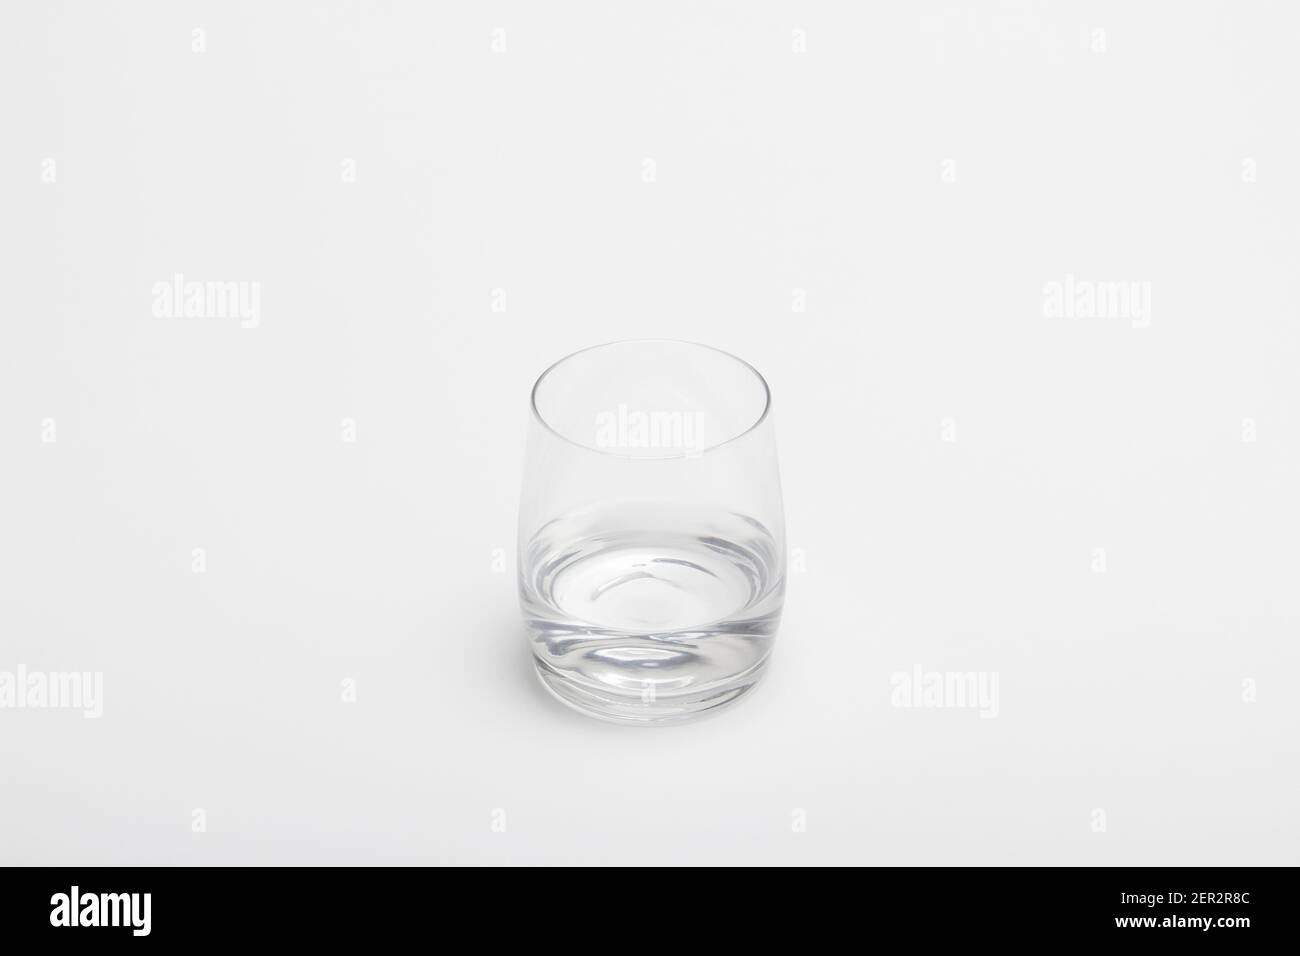 The half full glass of pure water isolated on a white background. A drinking glass half filled with water. A half empty glass with water. Stock Photo